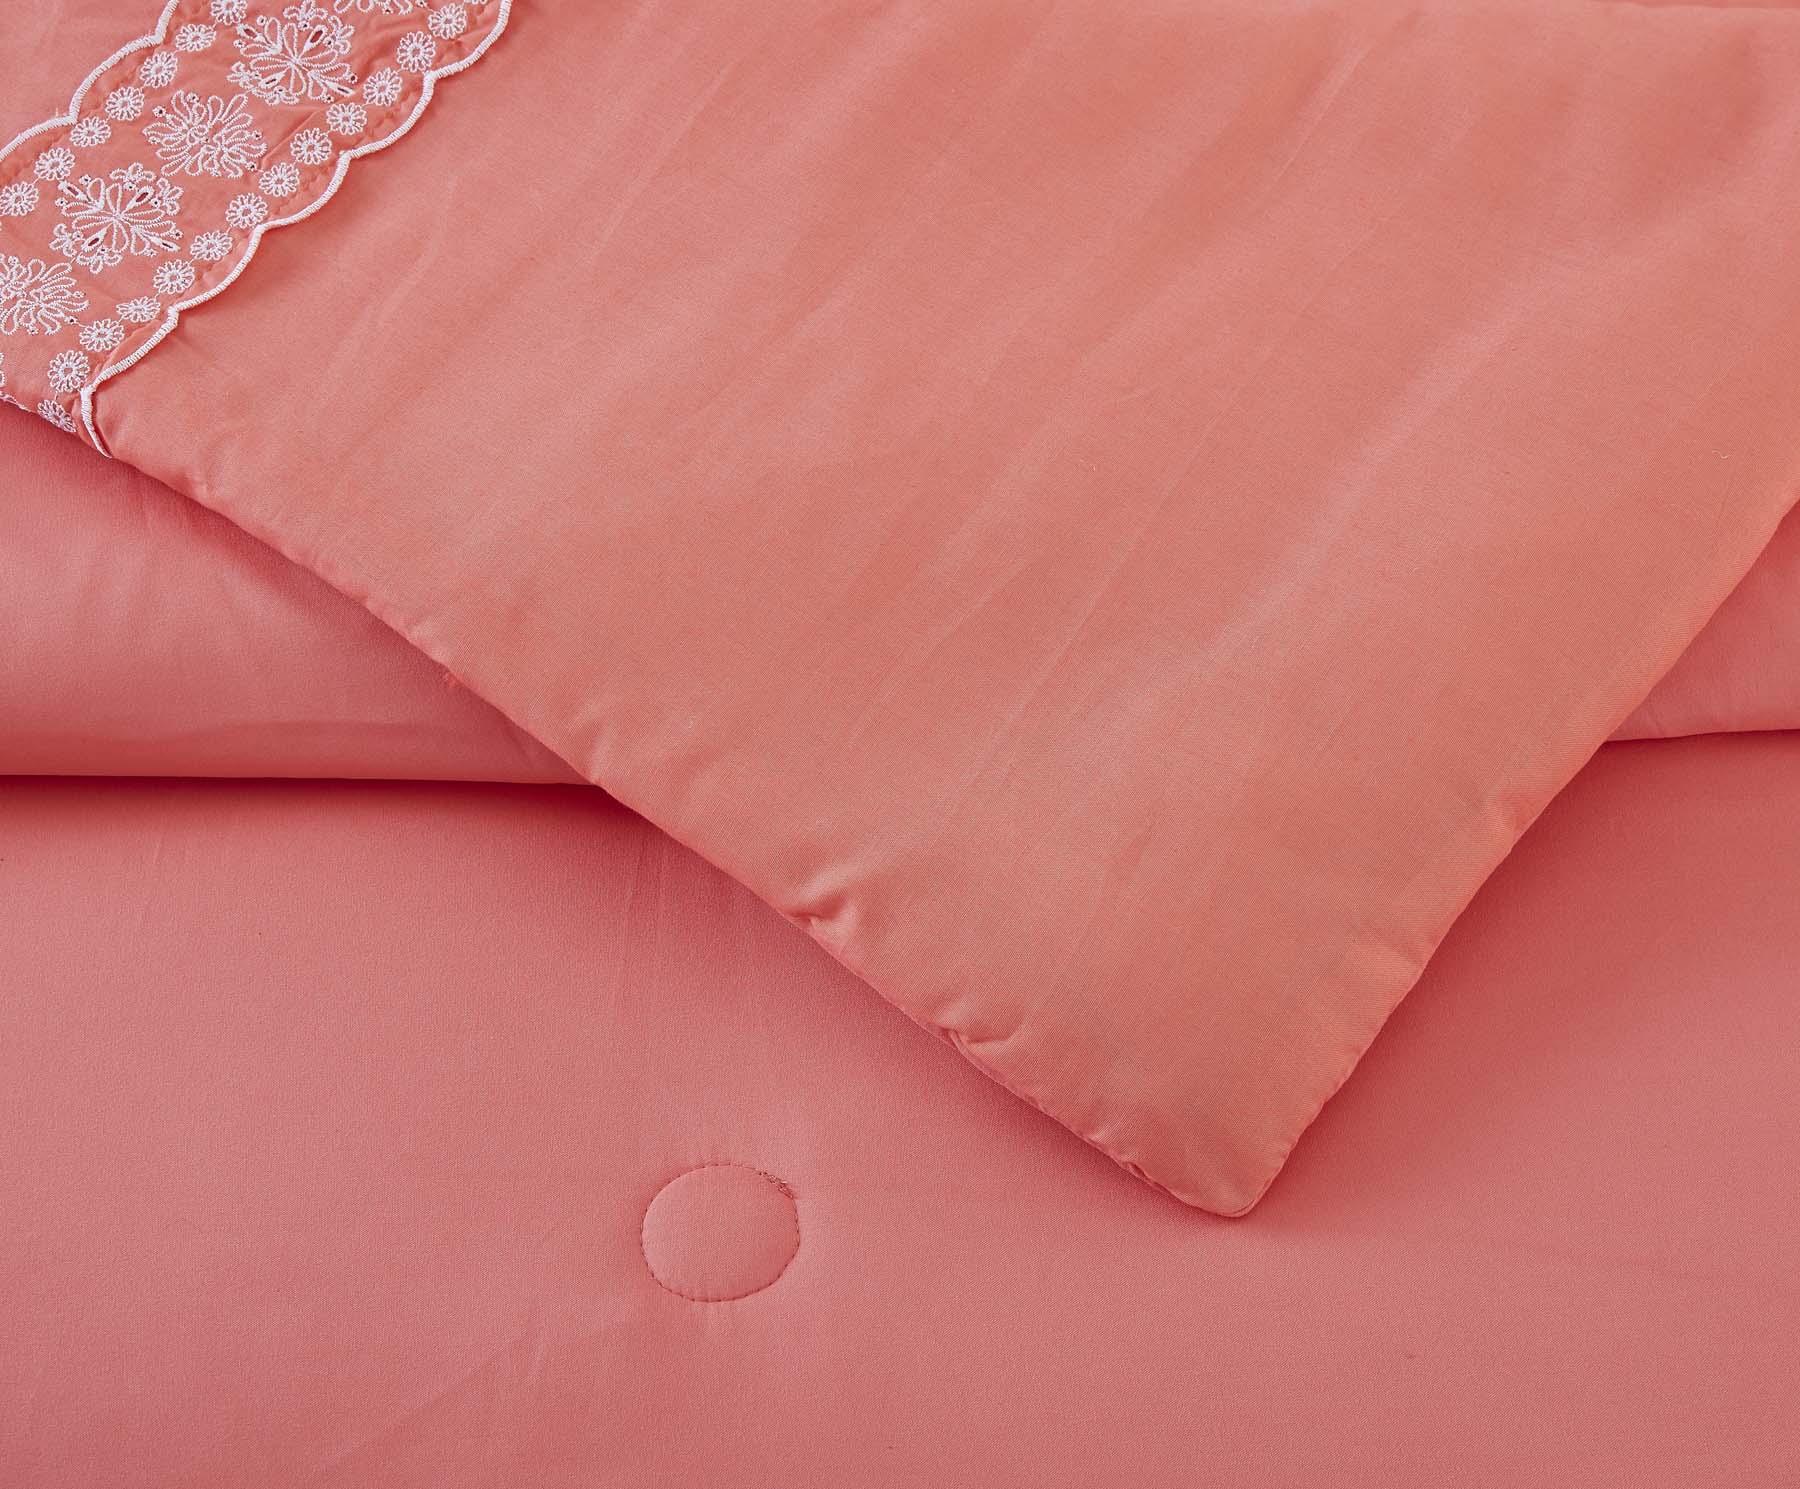 The Pioneer Woman Coral Cotton Eyelet 4-Piece Comforter Set, Full / Queen - image 2 of 9